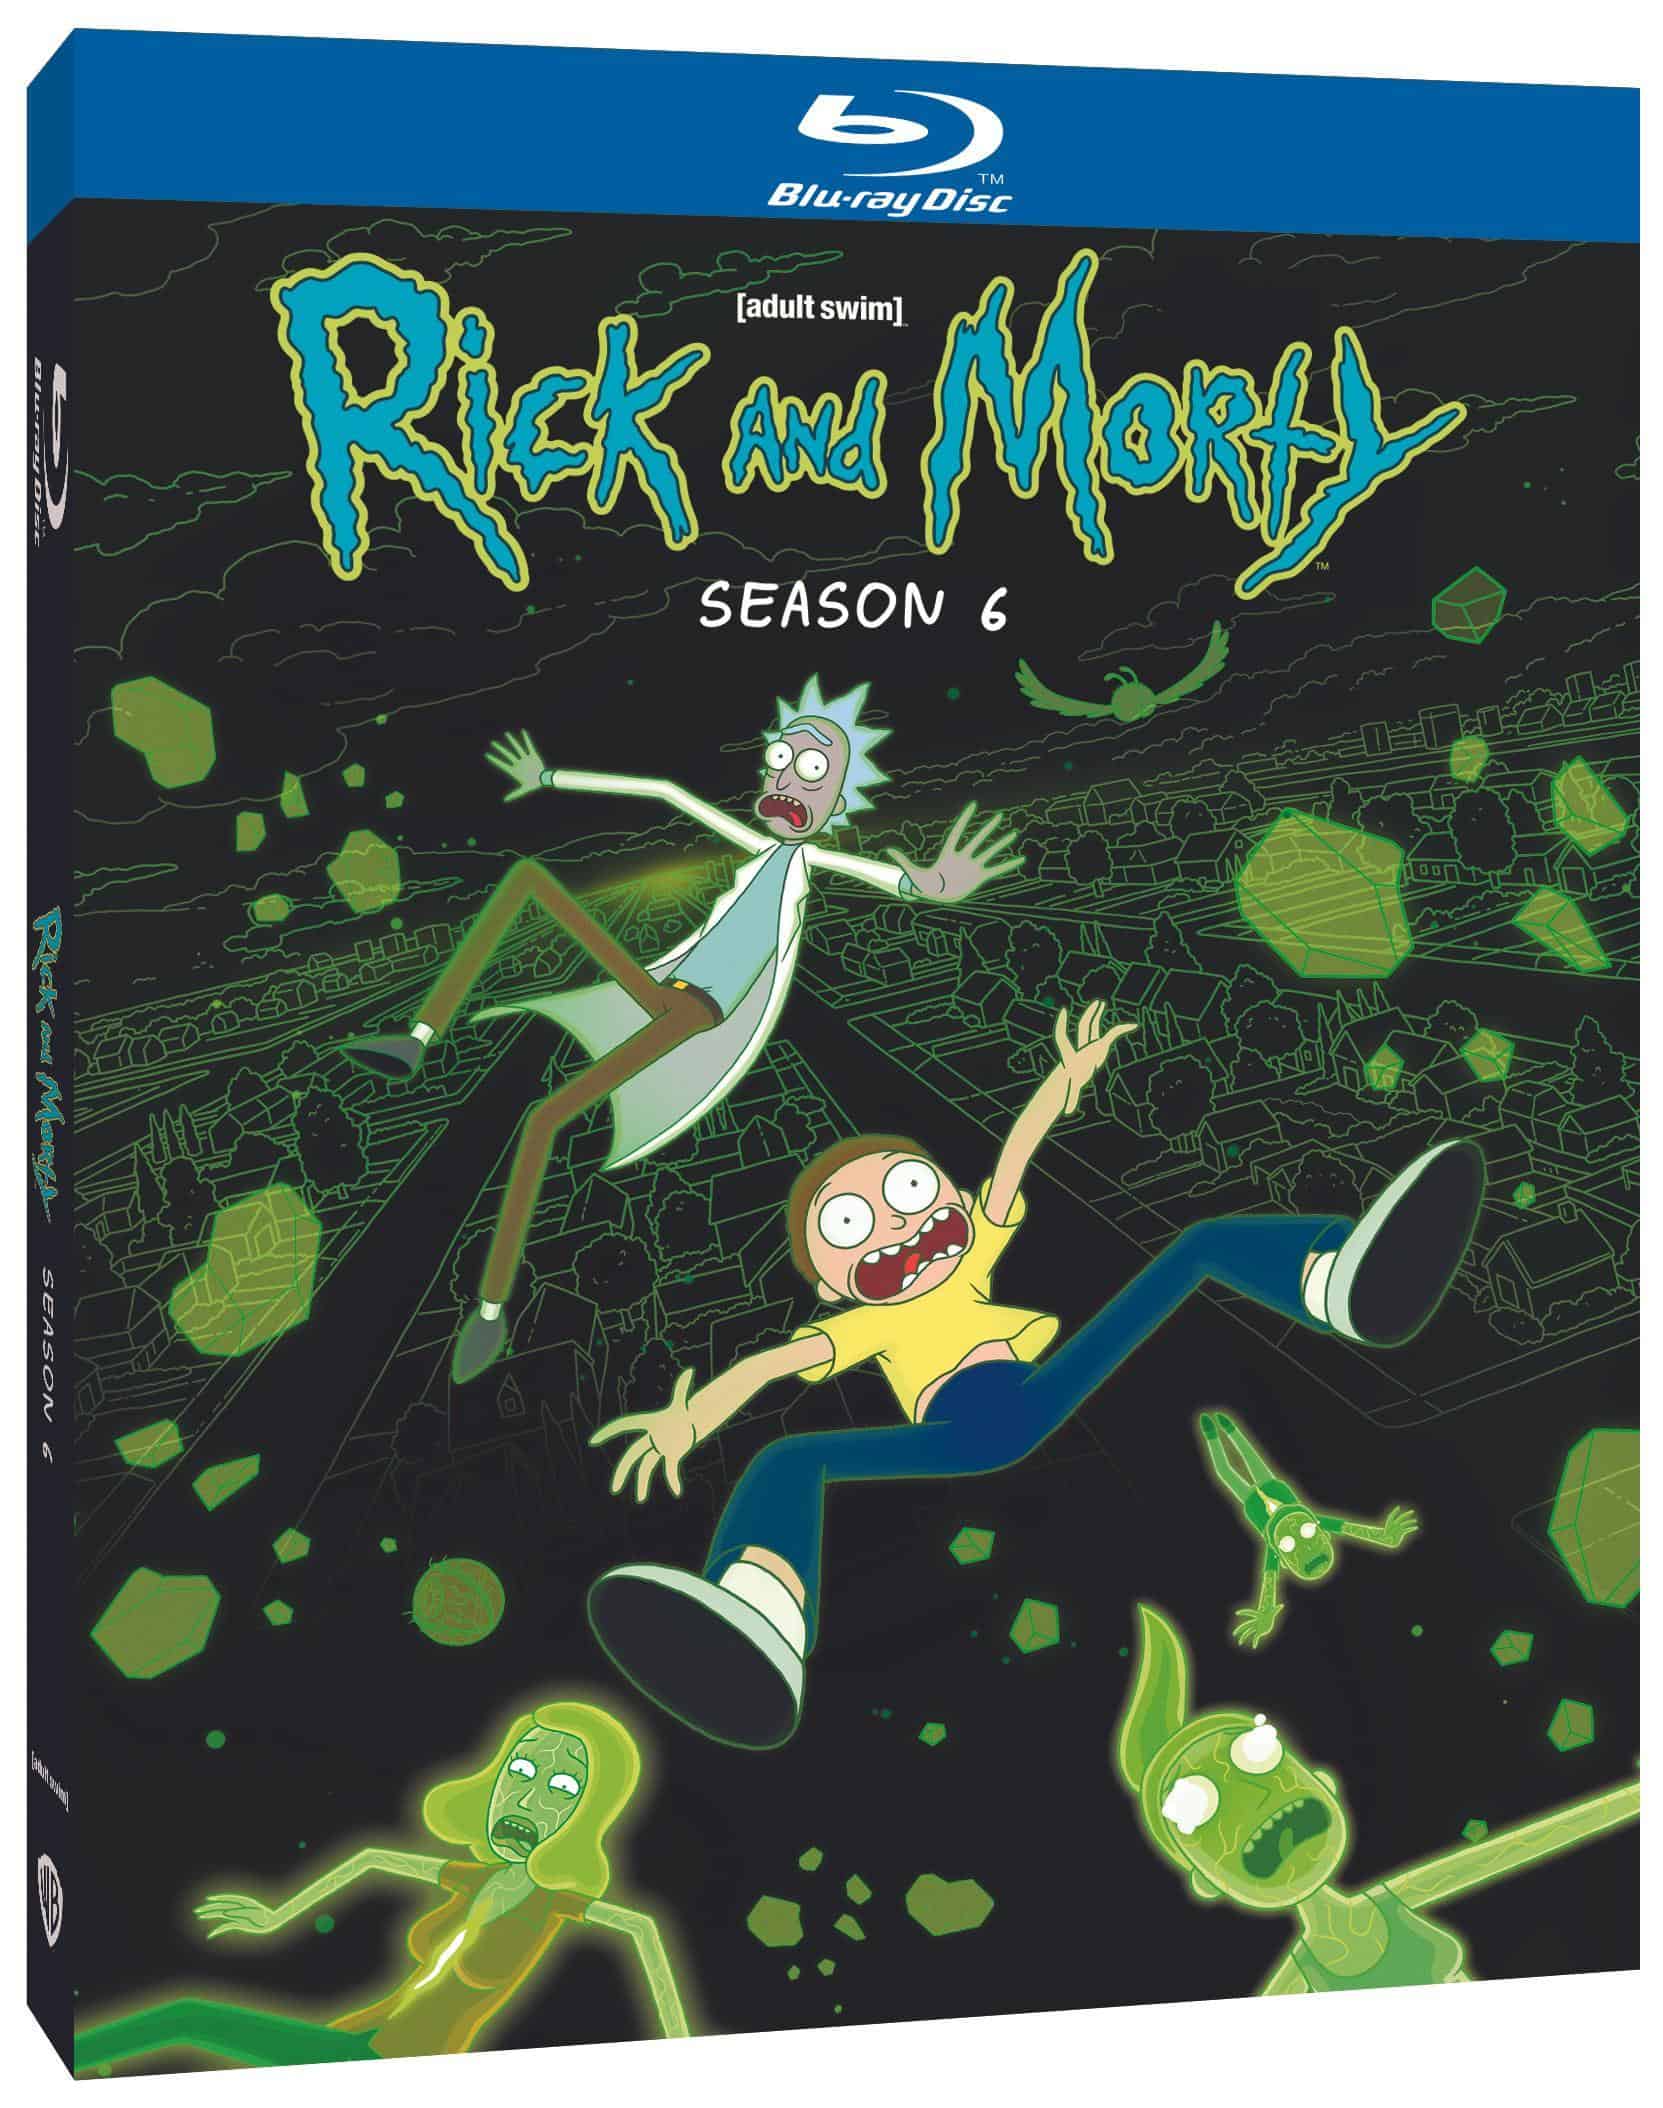 Rick and Morty Season 6 comes to Blu-ray and Steelbook on March 28th 39